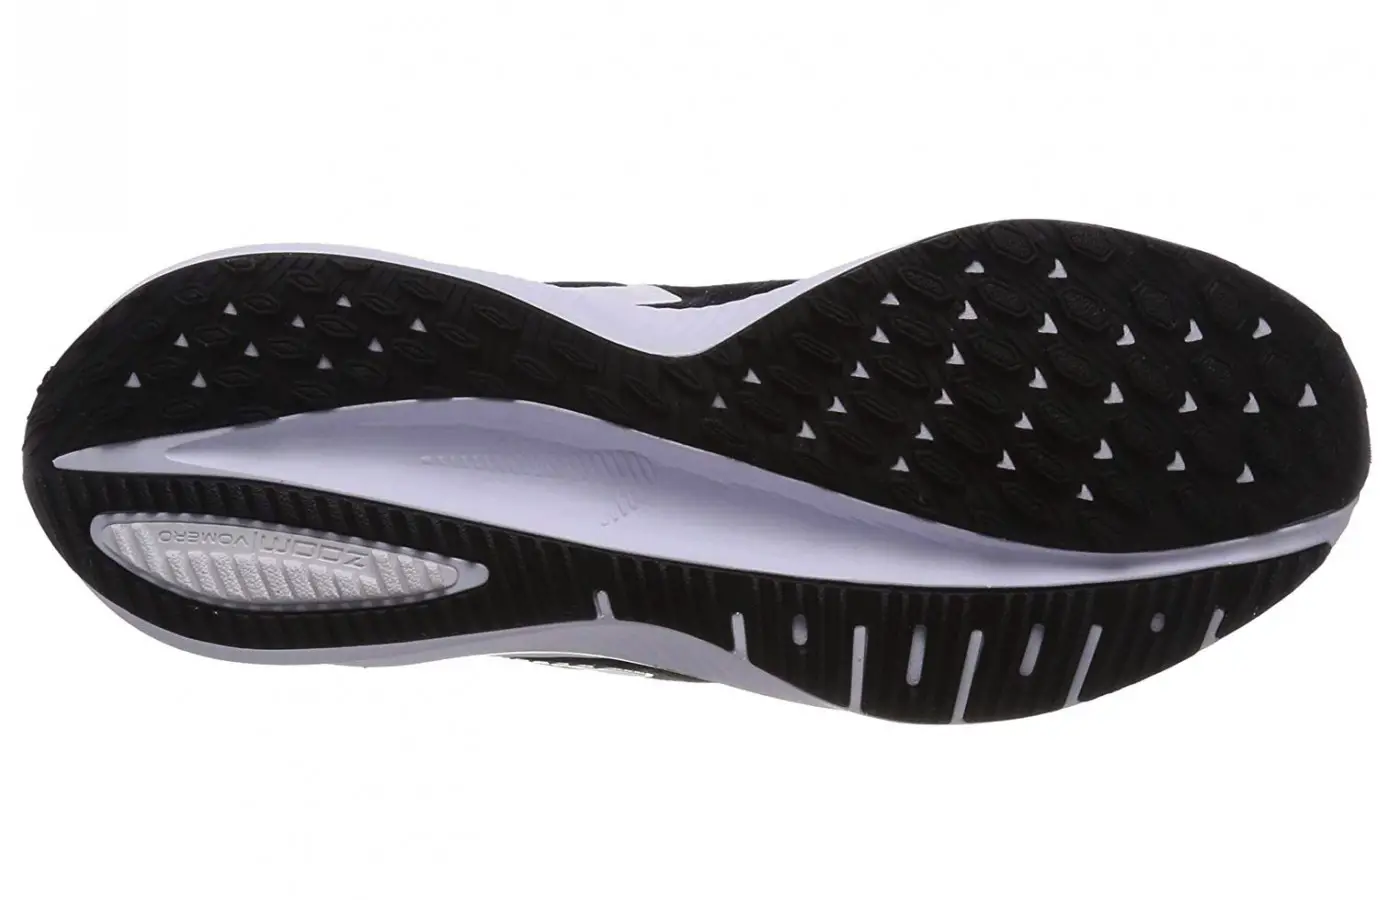 The Nike Zoom Vomero 14 offers an extra sticky outsole for better traction.